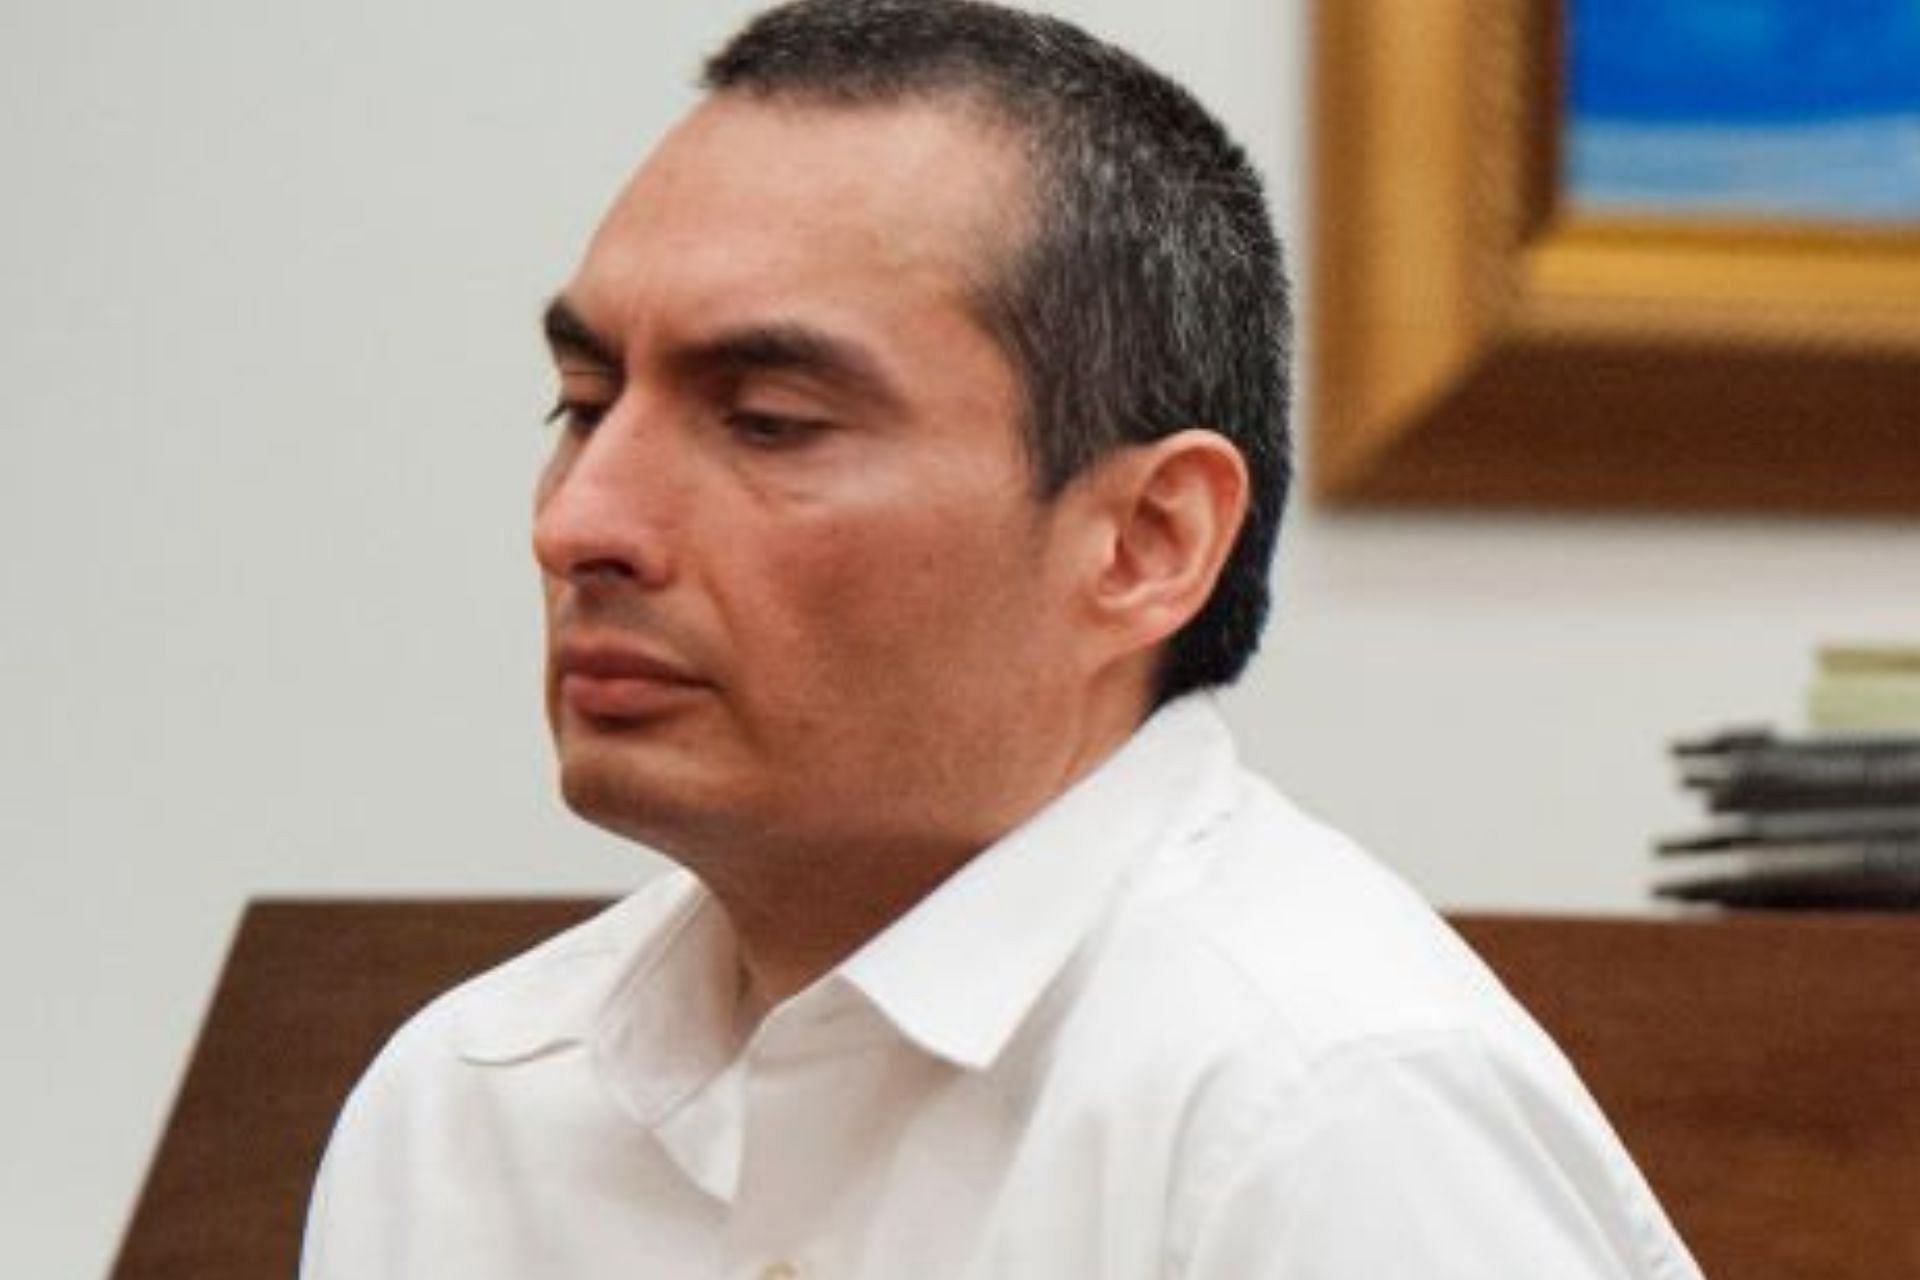 Sam Lopez in court during his May 2015 sentencing (Image via MediaNews Group/Getty Images)